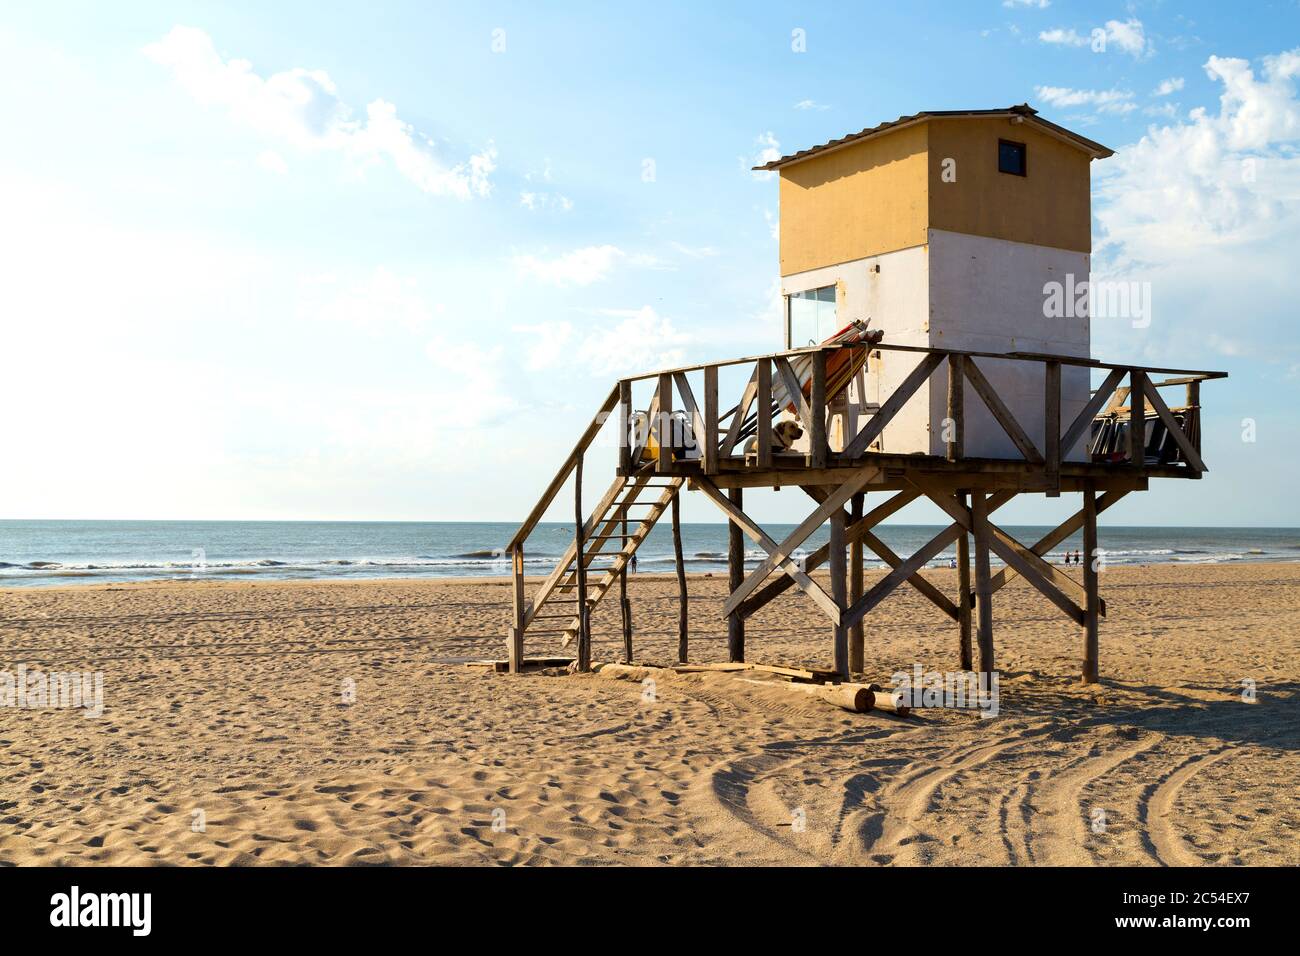 Beach scene. Lifeguard tower in foreground. Beautiful morning of summer. The sun bright over the sea. Mar de las Pampas, Argentina. Stock Photo